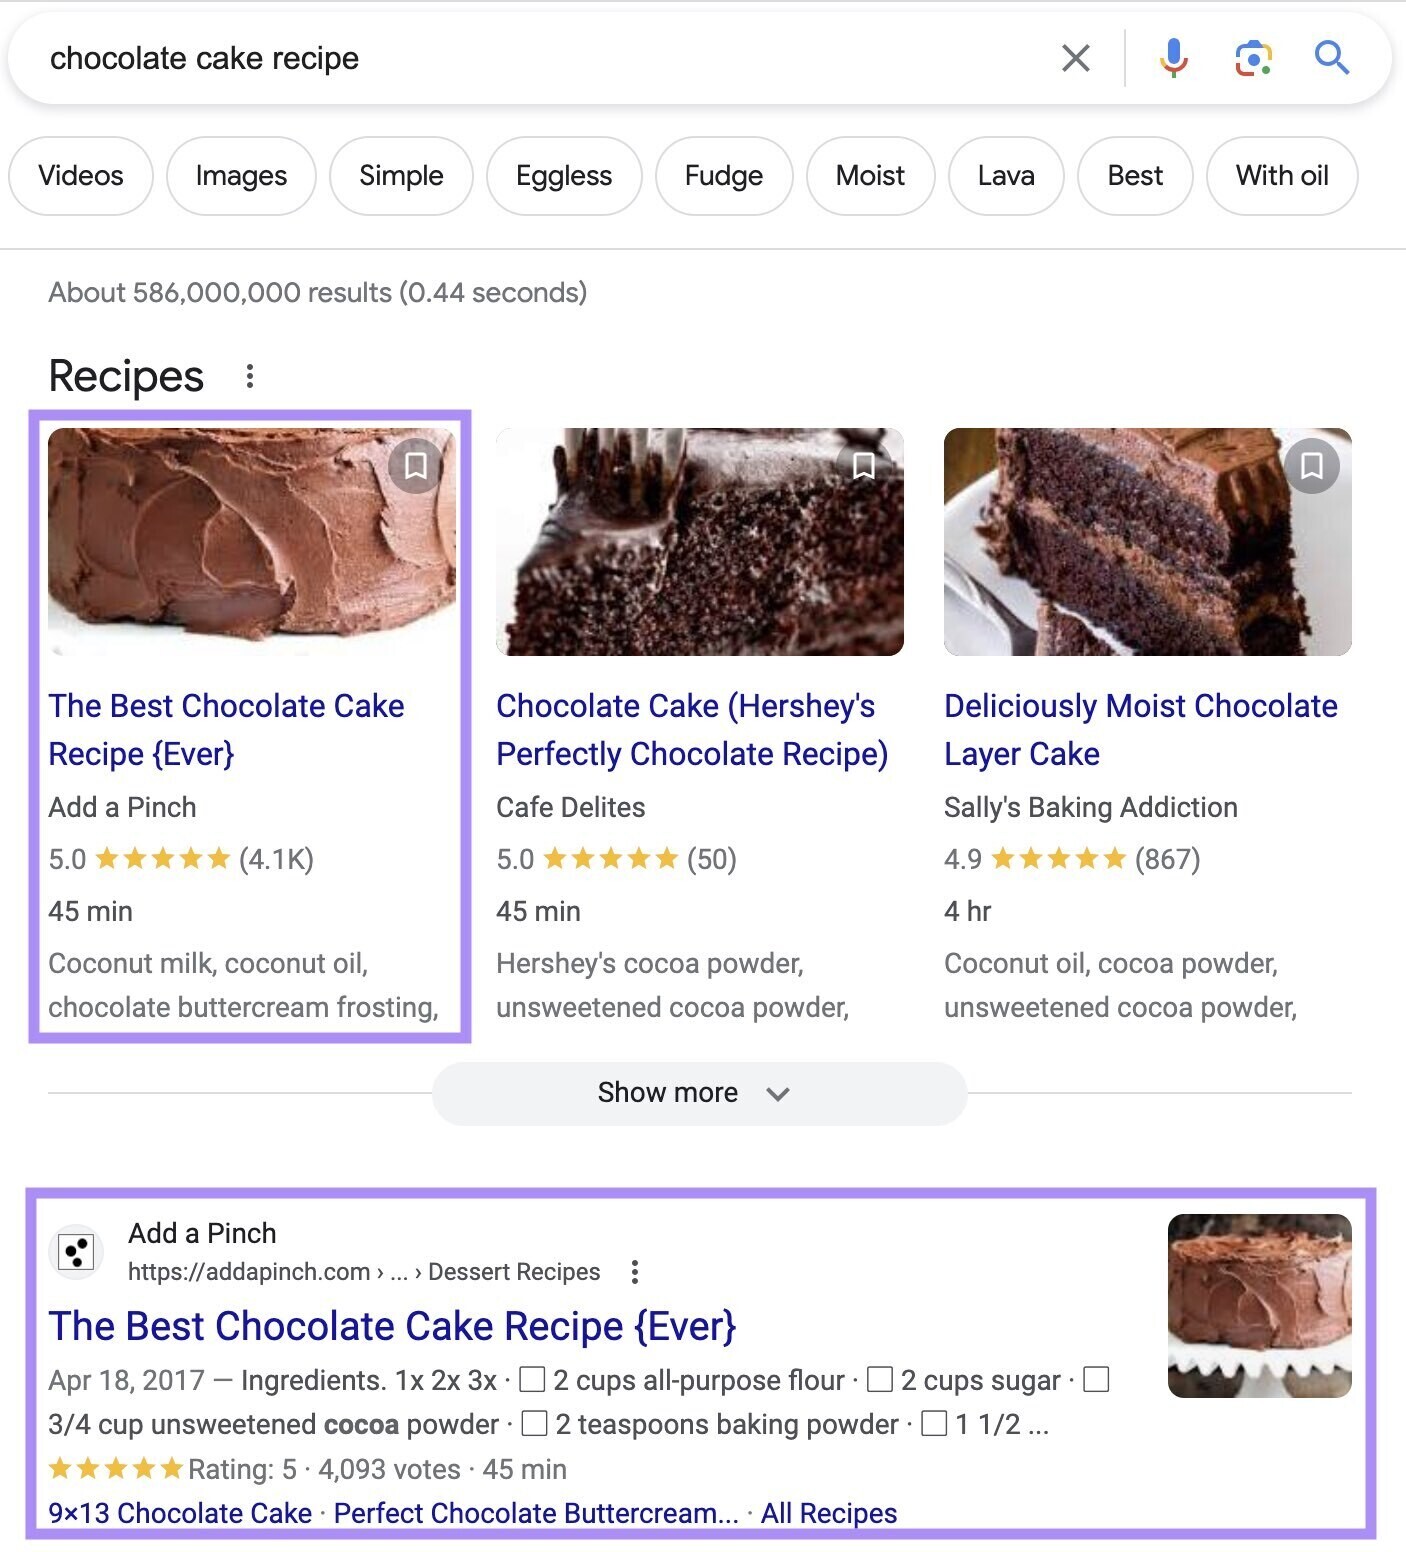 Google’s first results for “chocolate cake recipe” is from "Add a Pinch"